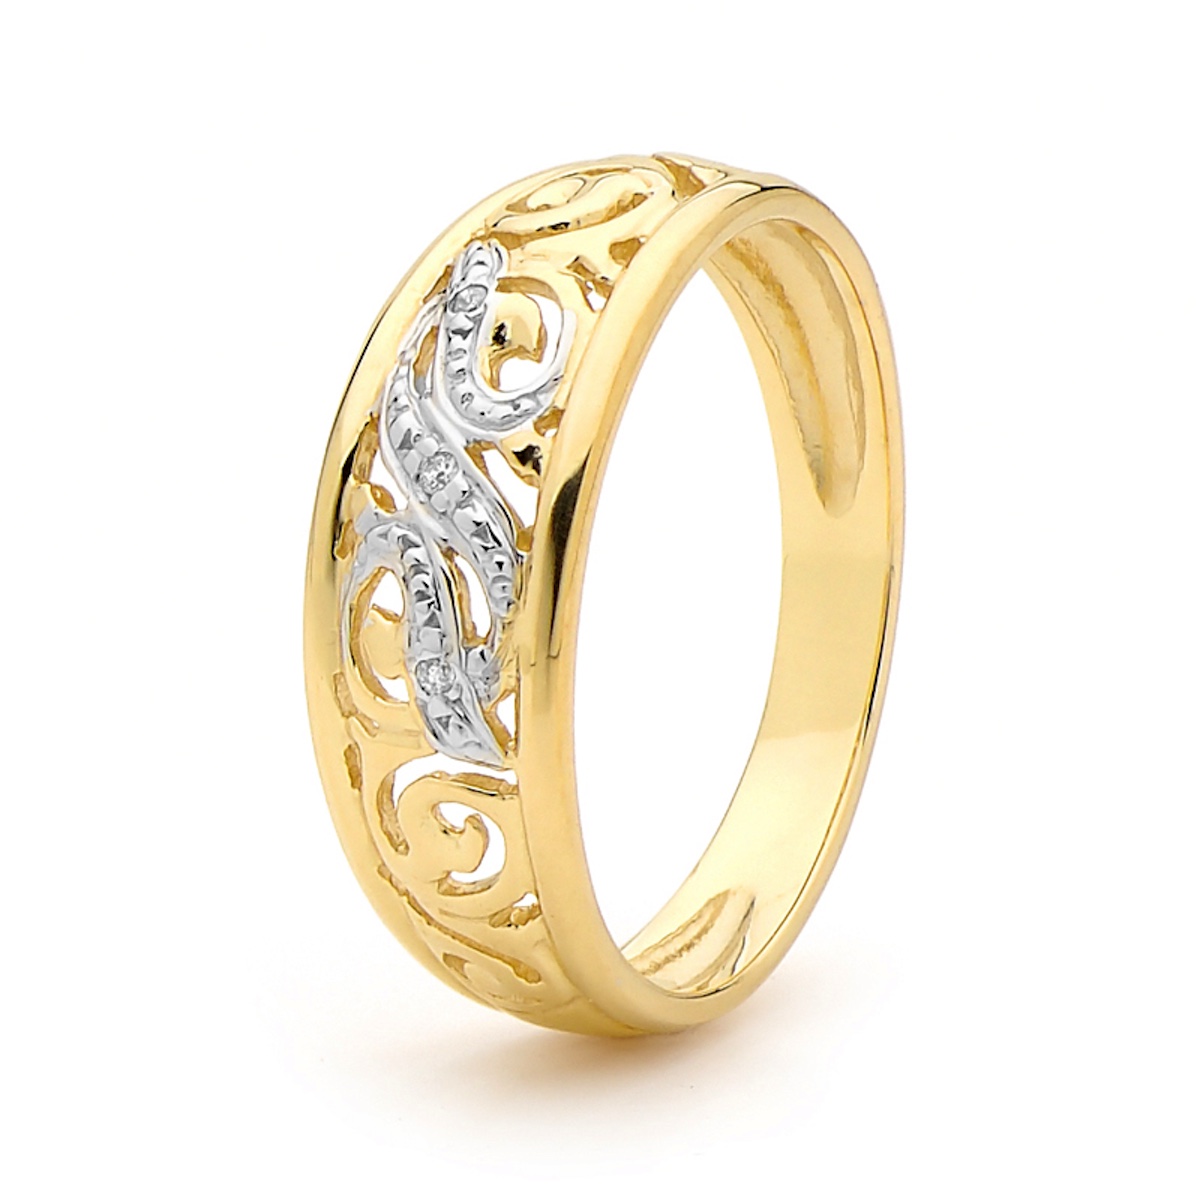 Love Diamond Ring with Celtic Carving